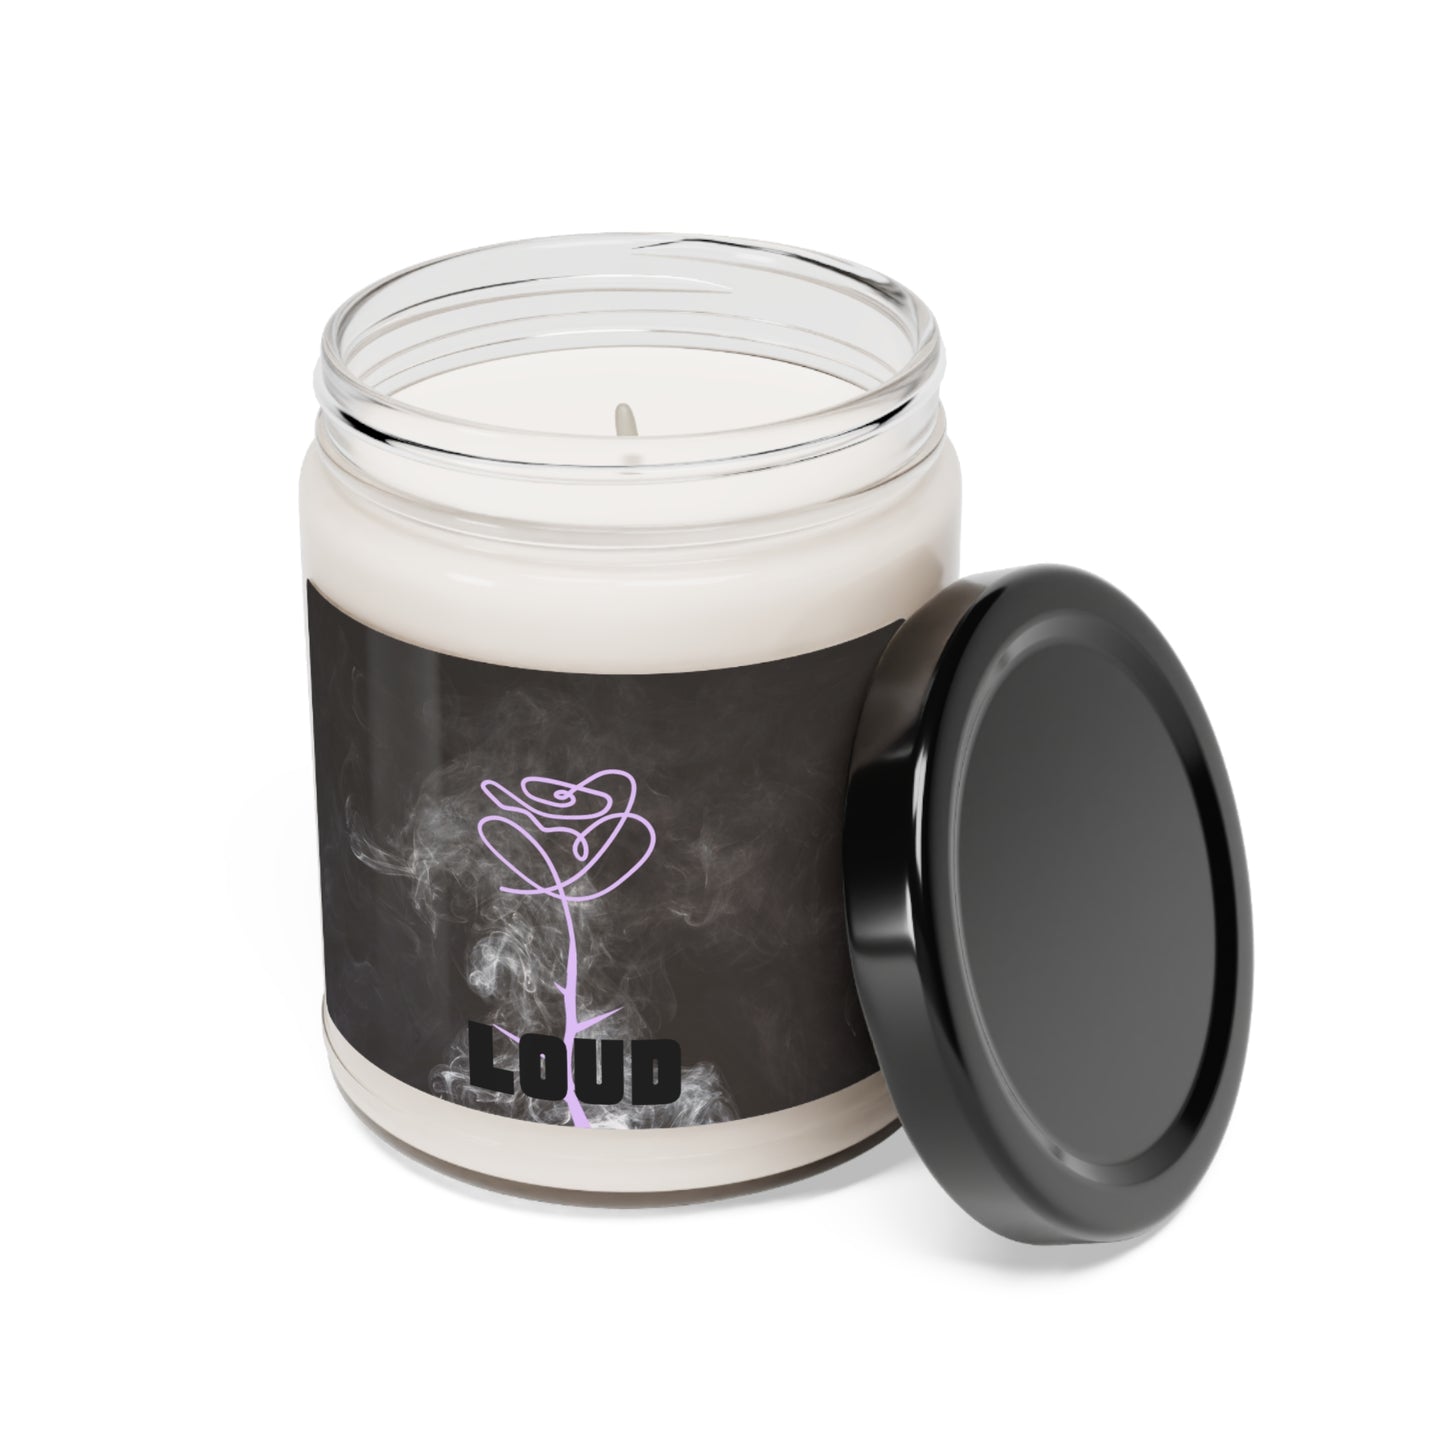 Femme Floral Soy Candle